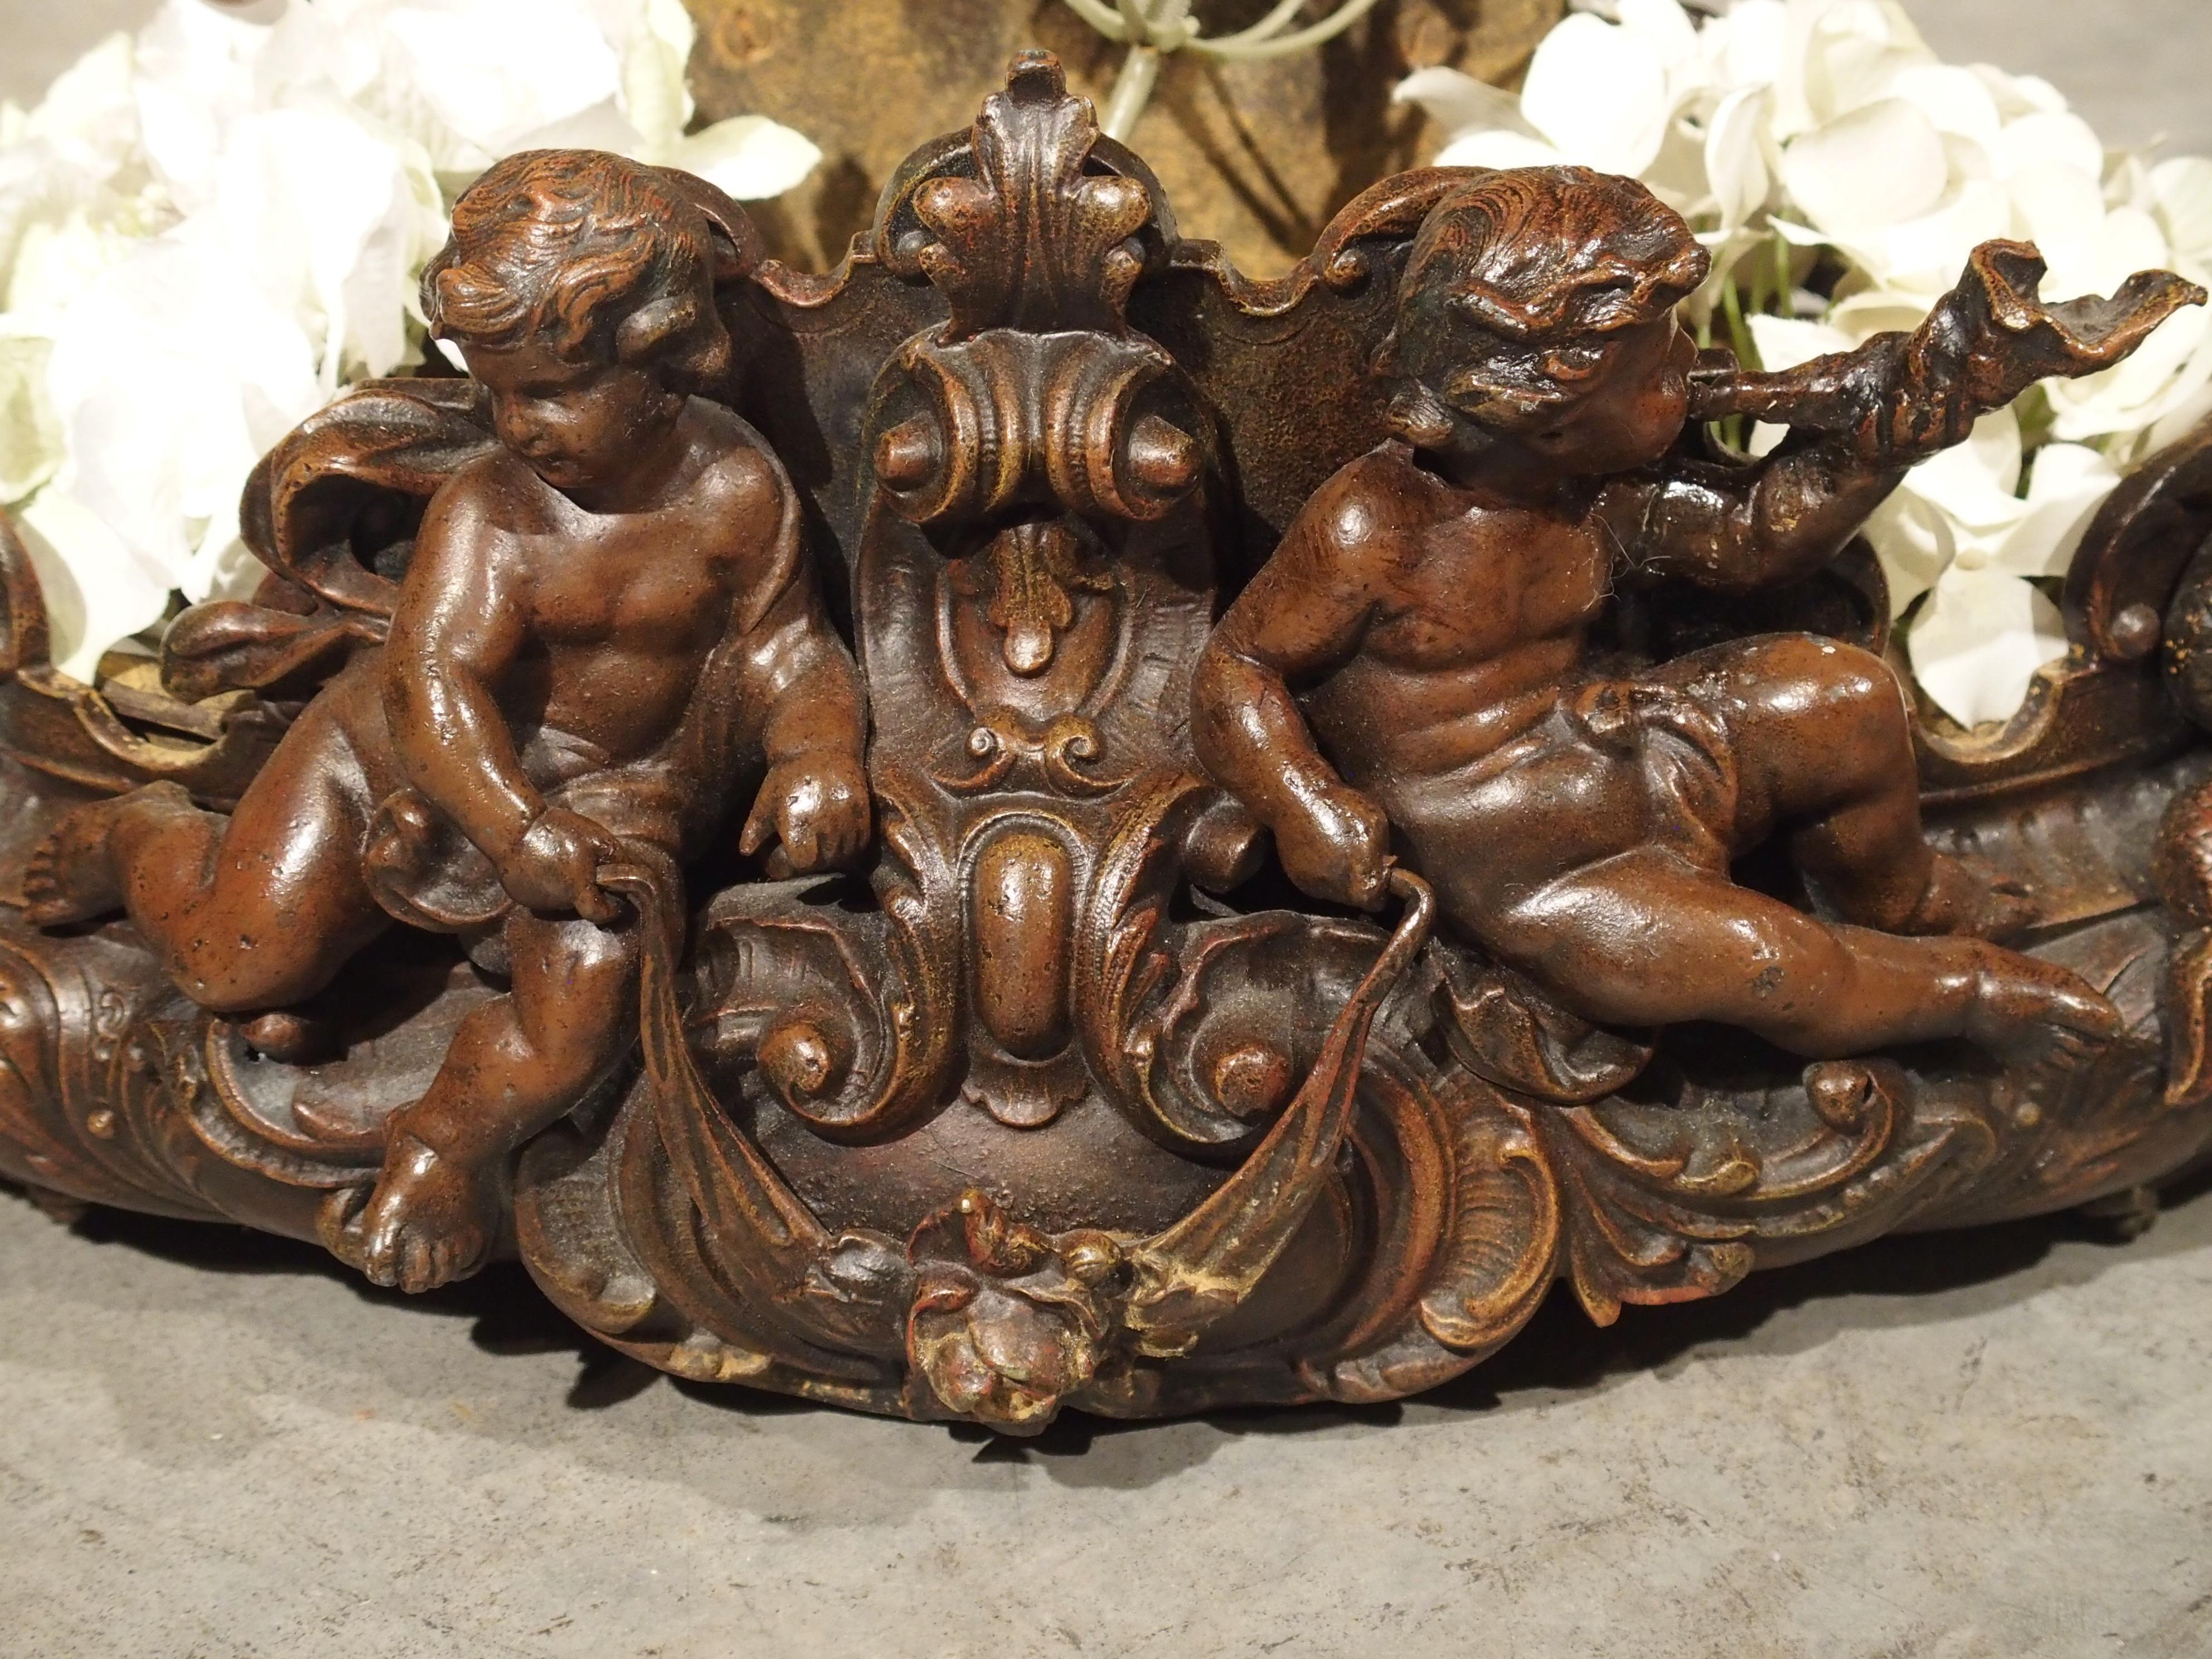 This ornate French jardinière featuring mythological creatures was cast in bronze and is in the style of Louis XV. The main decorative elements of the jardinière include two sets of putti and a pair of hippocampi. A hippocamp is a mythological